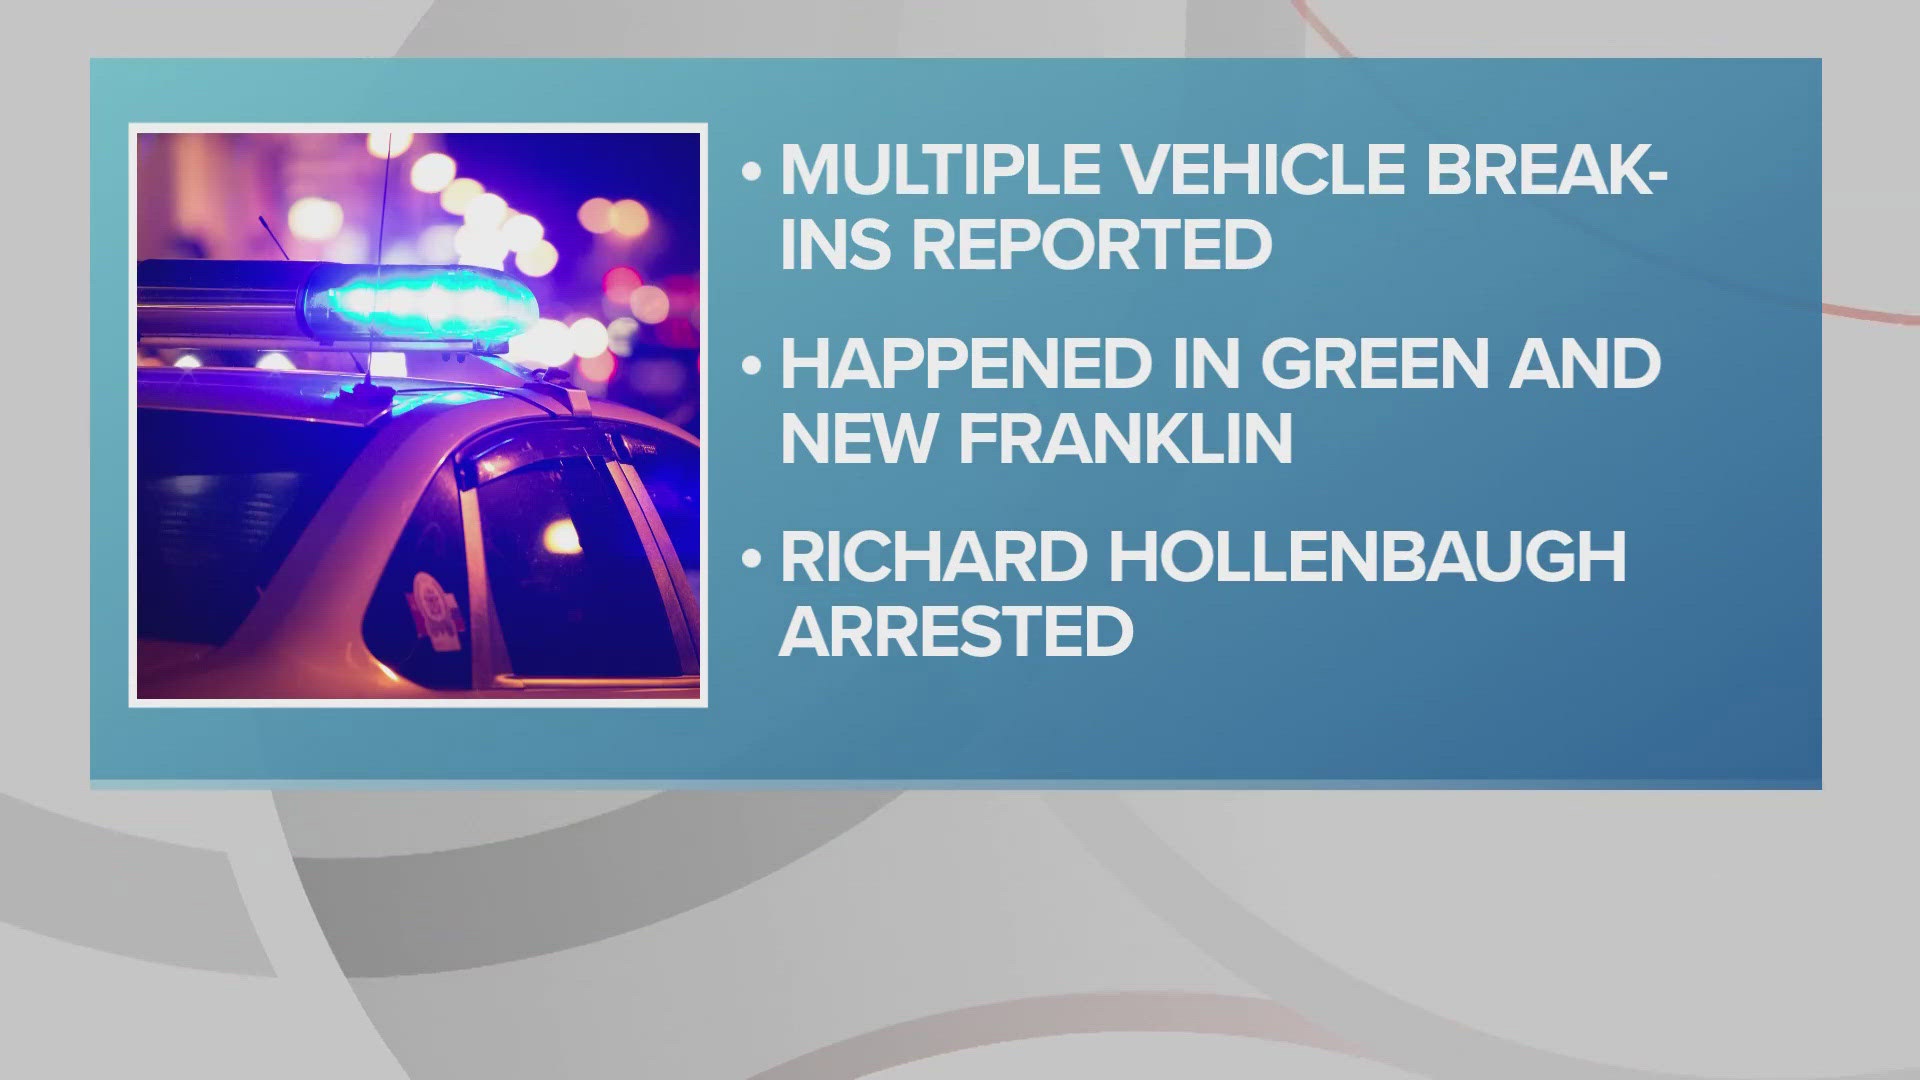 Richard Hollenbaugh was arrested on Saturday. He is accused of several vehicle break-ins in Summit County